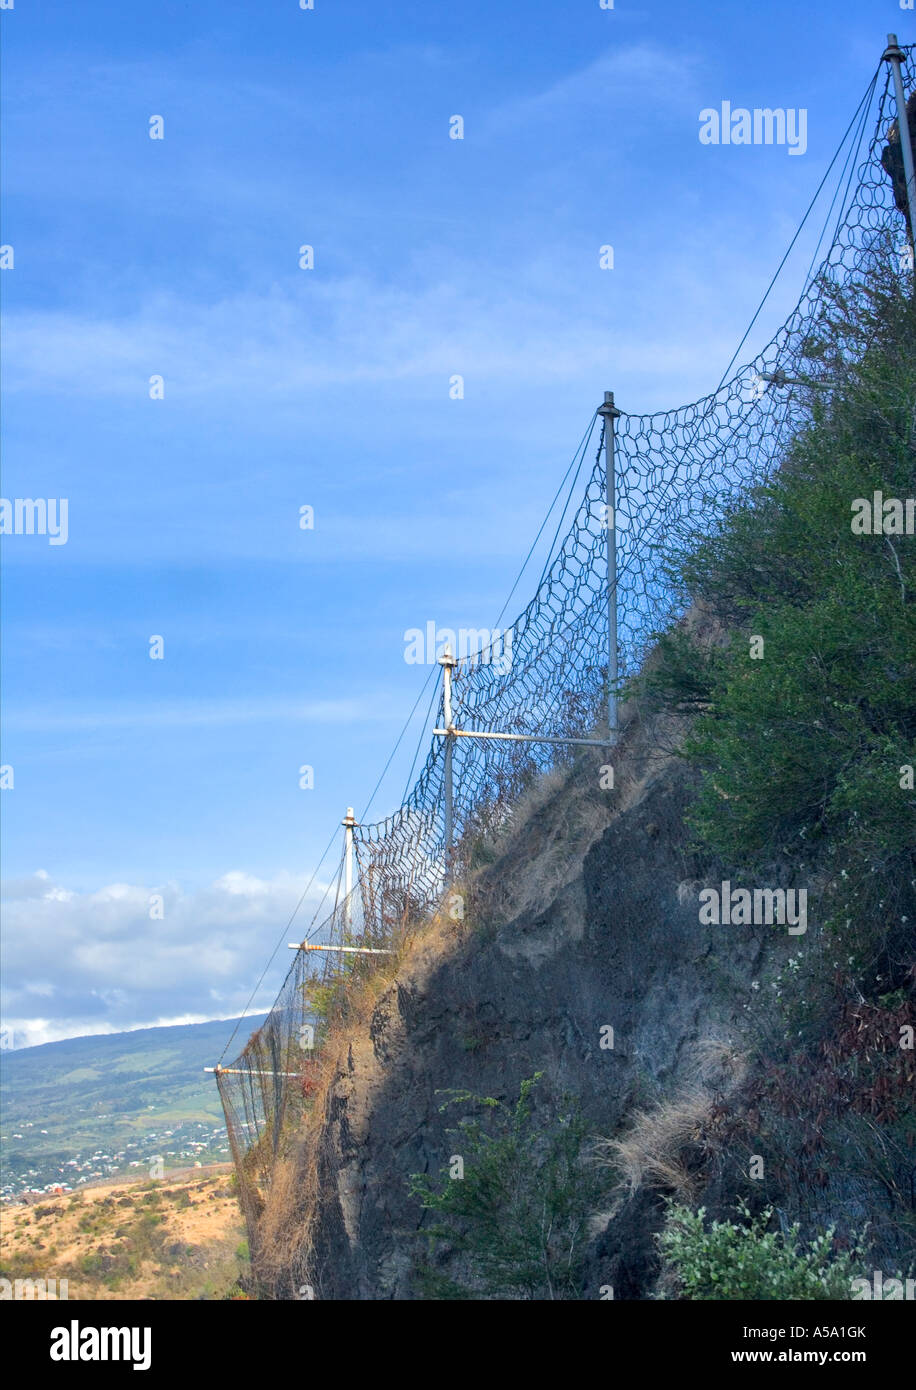 Defensive wire netting against rock fall dangers on coastal road in Réunion Stock Photo